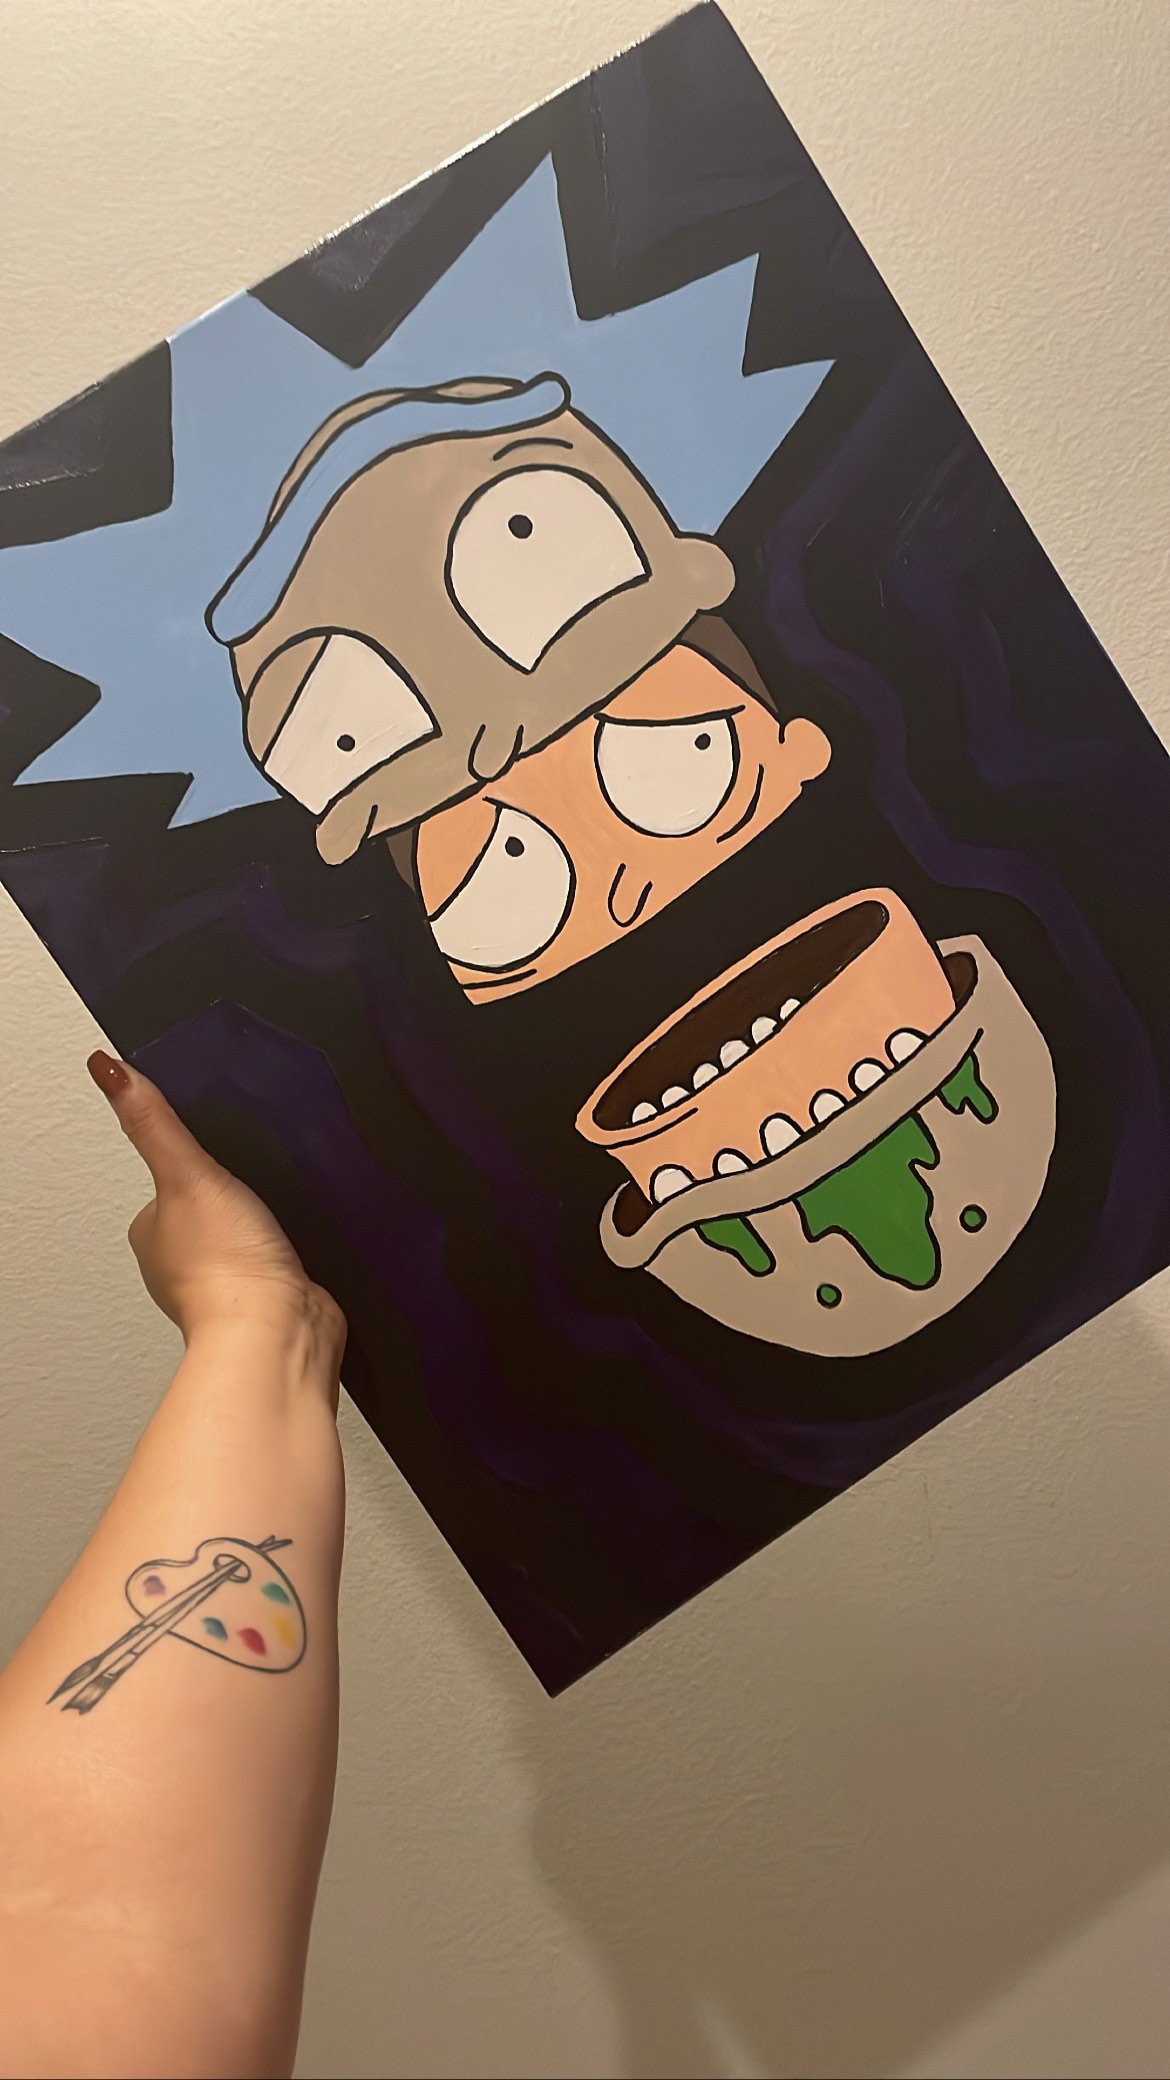 Rick Morty Painting 